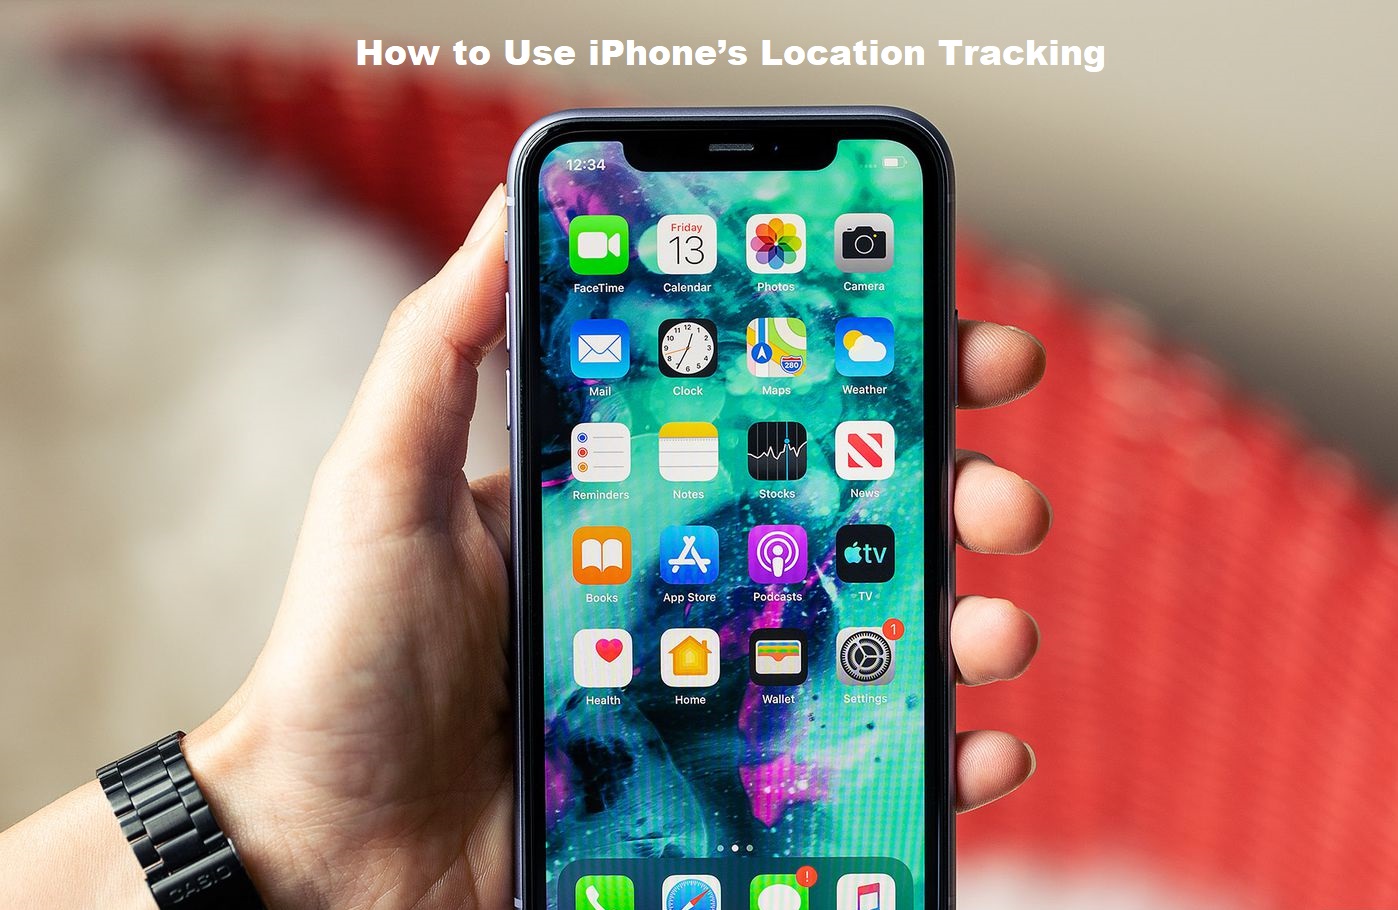 How to Use iPhone’s Location Tracking